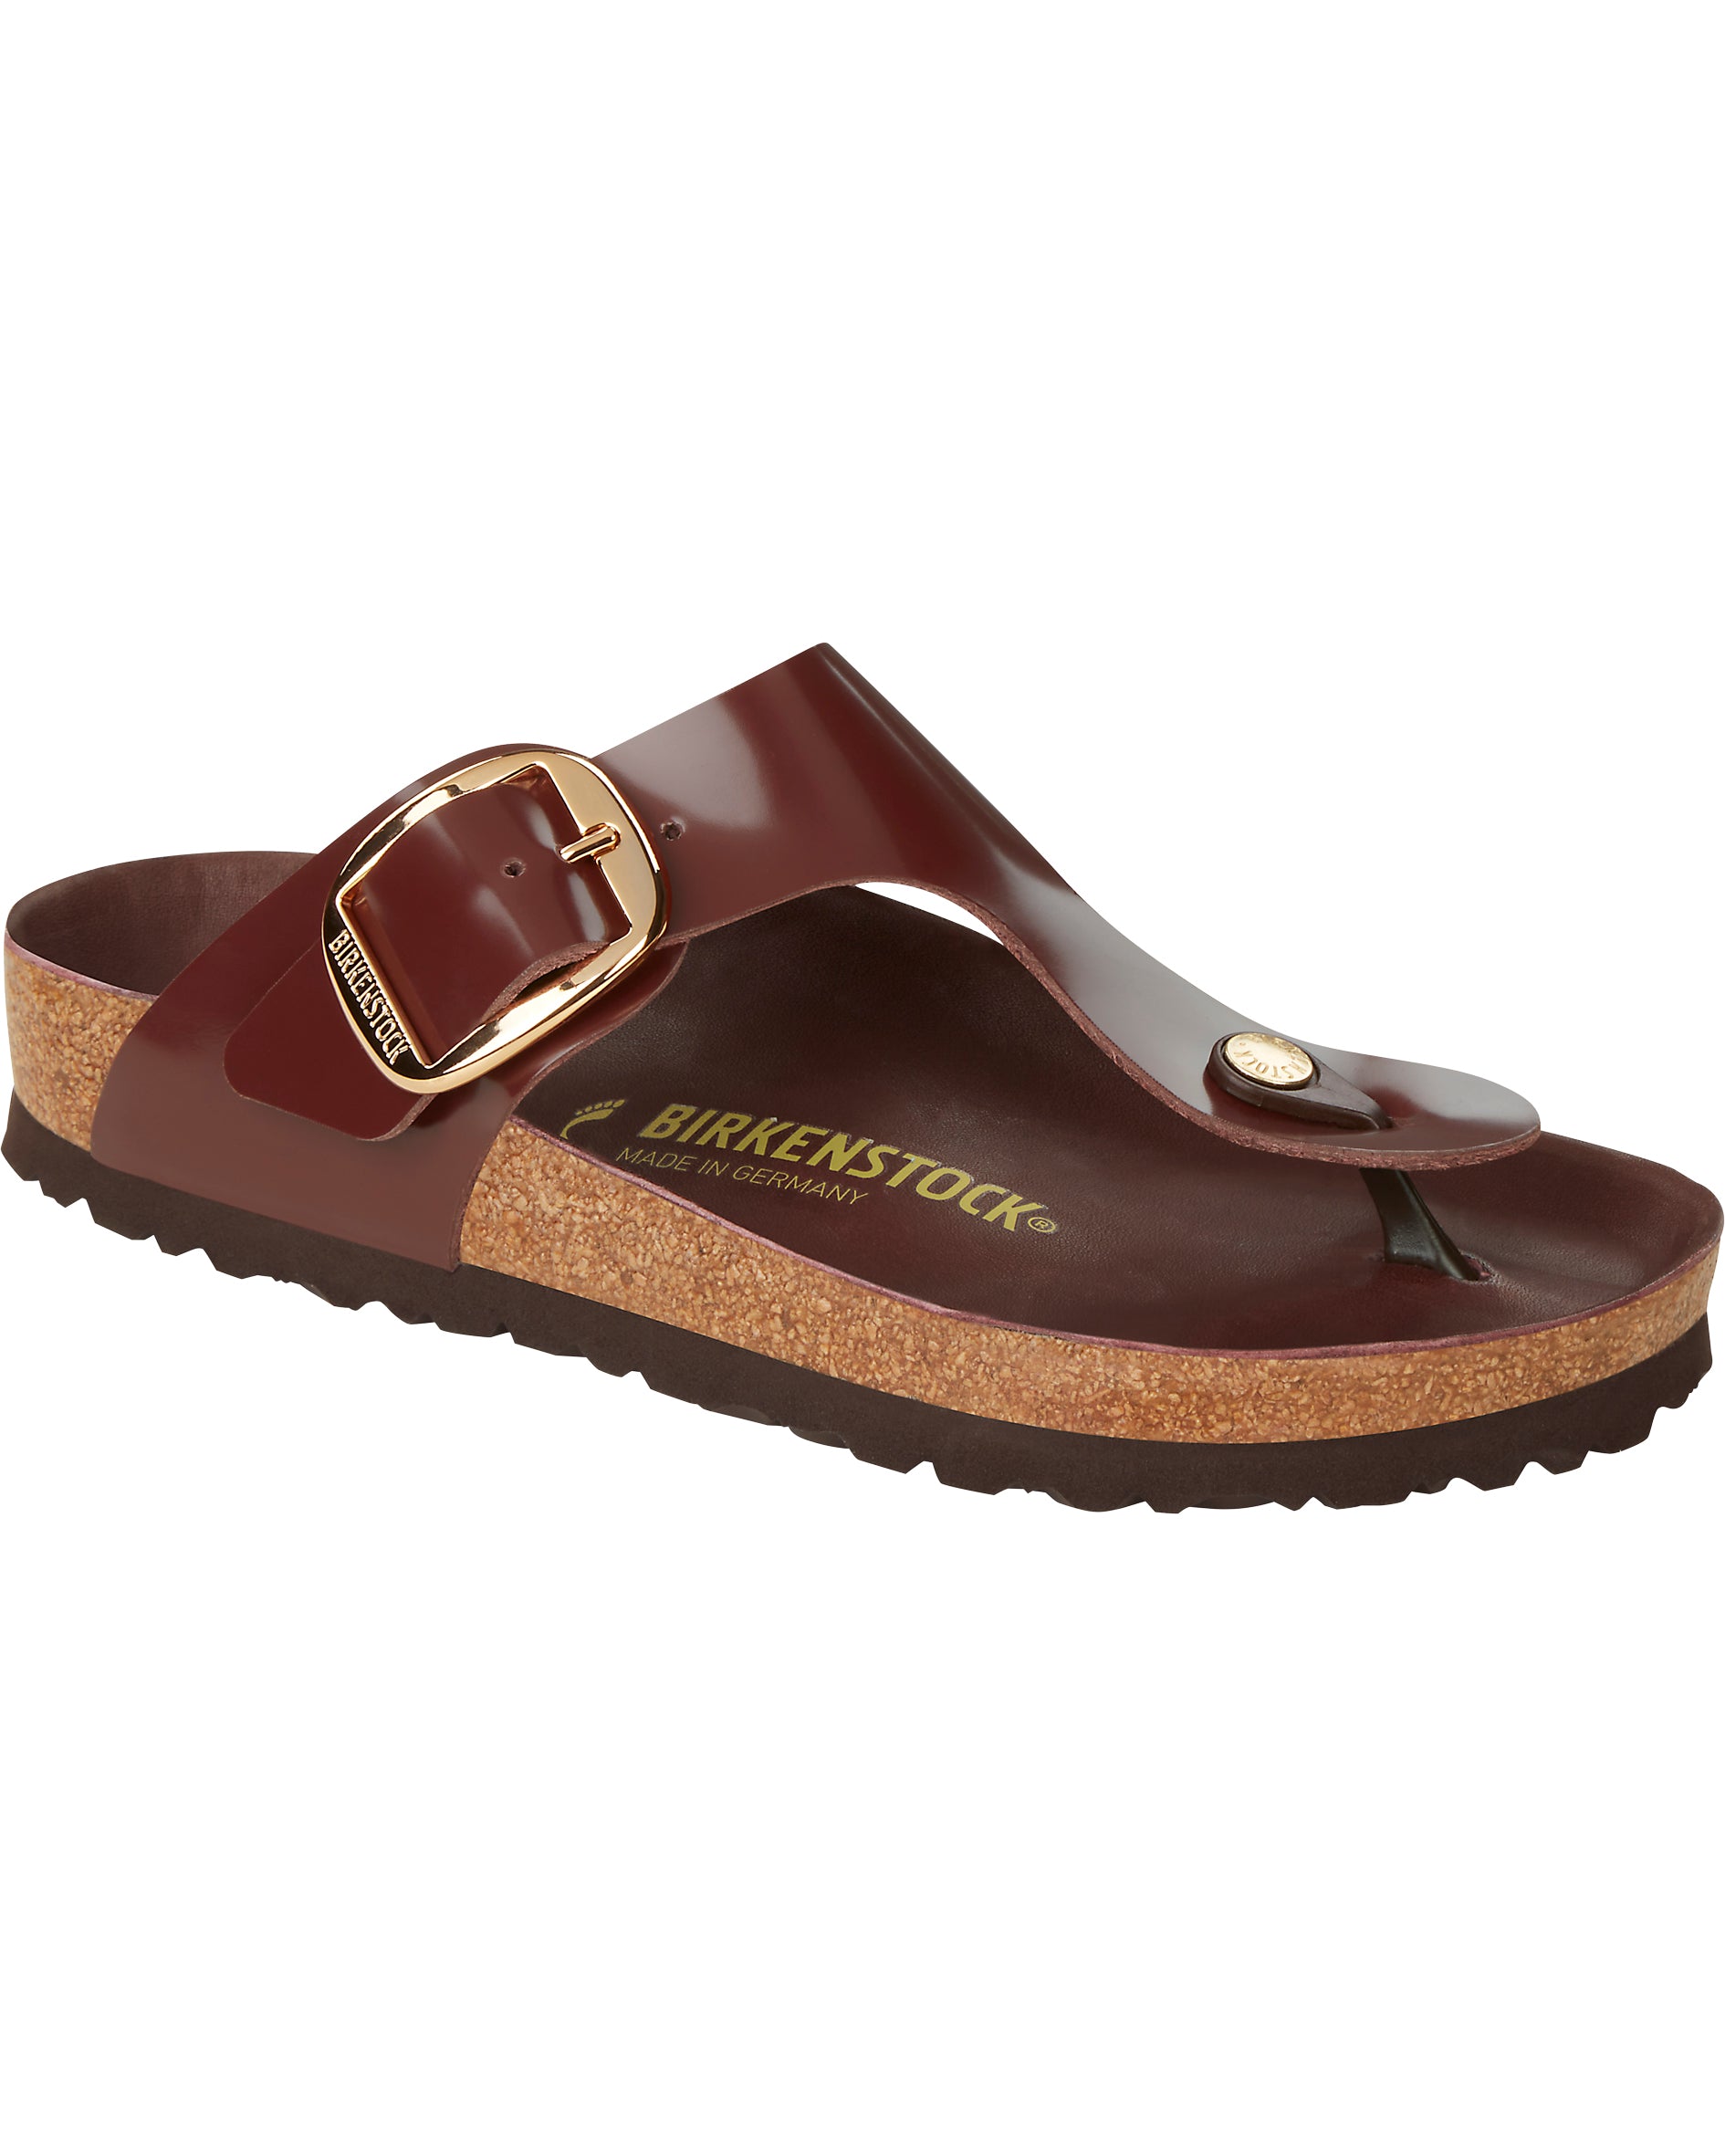 Gizeh Big Buckle High Shine Chocolate Leather Sandals